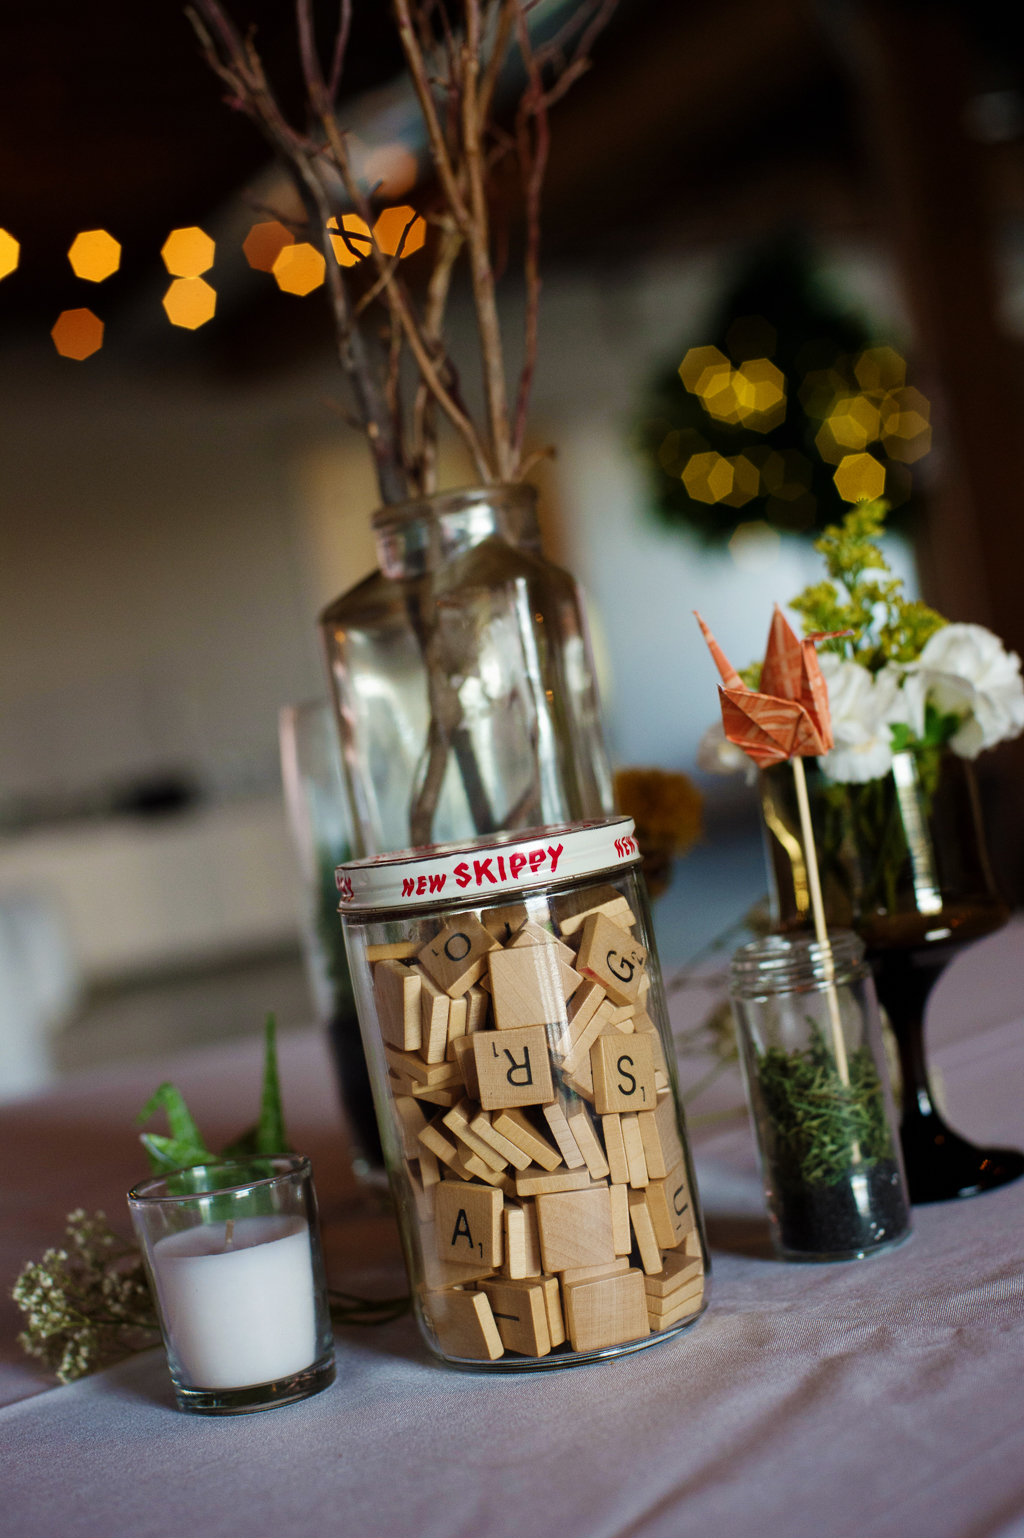 vintage scrabble pieces fill a jar on a table at a wedding reception